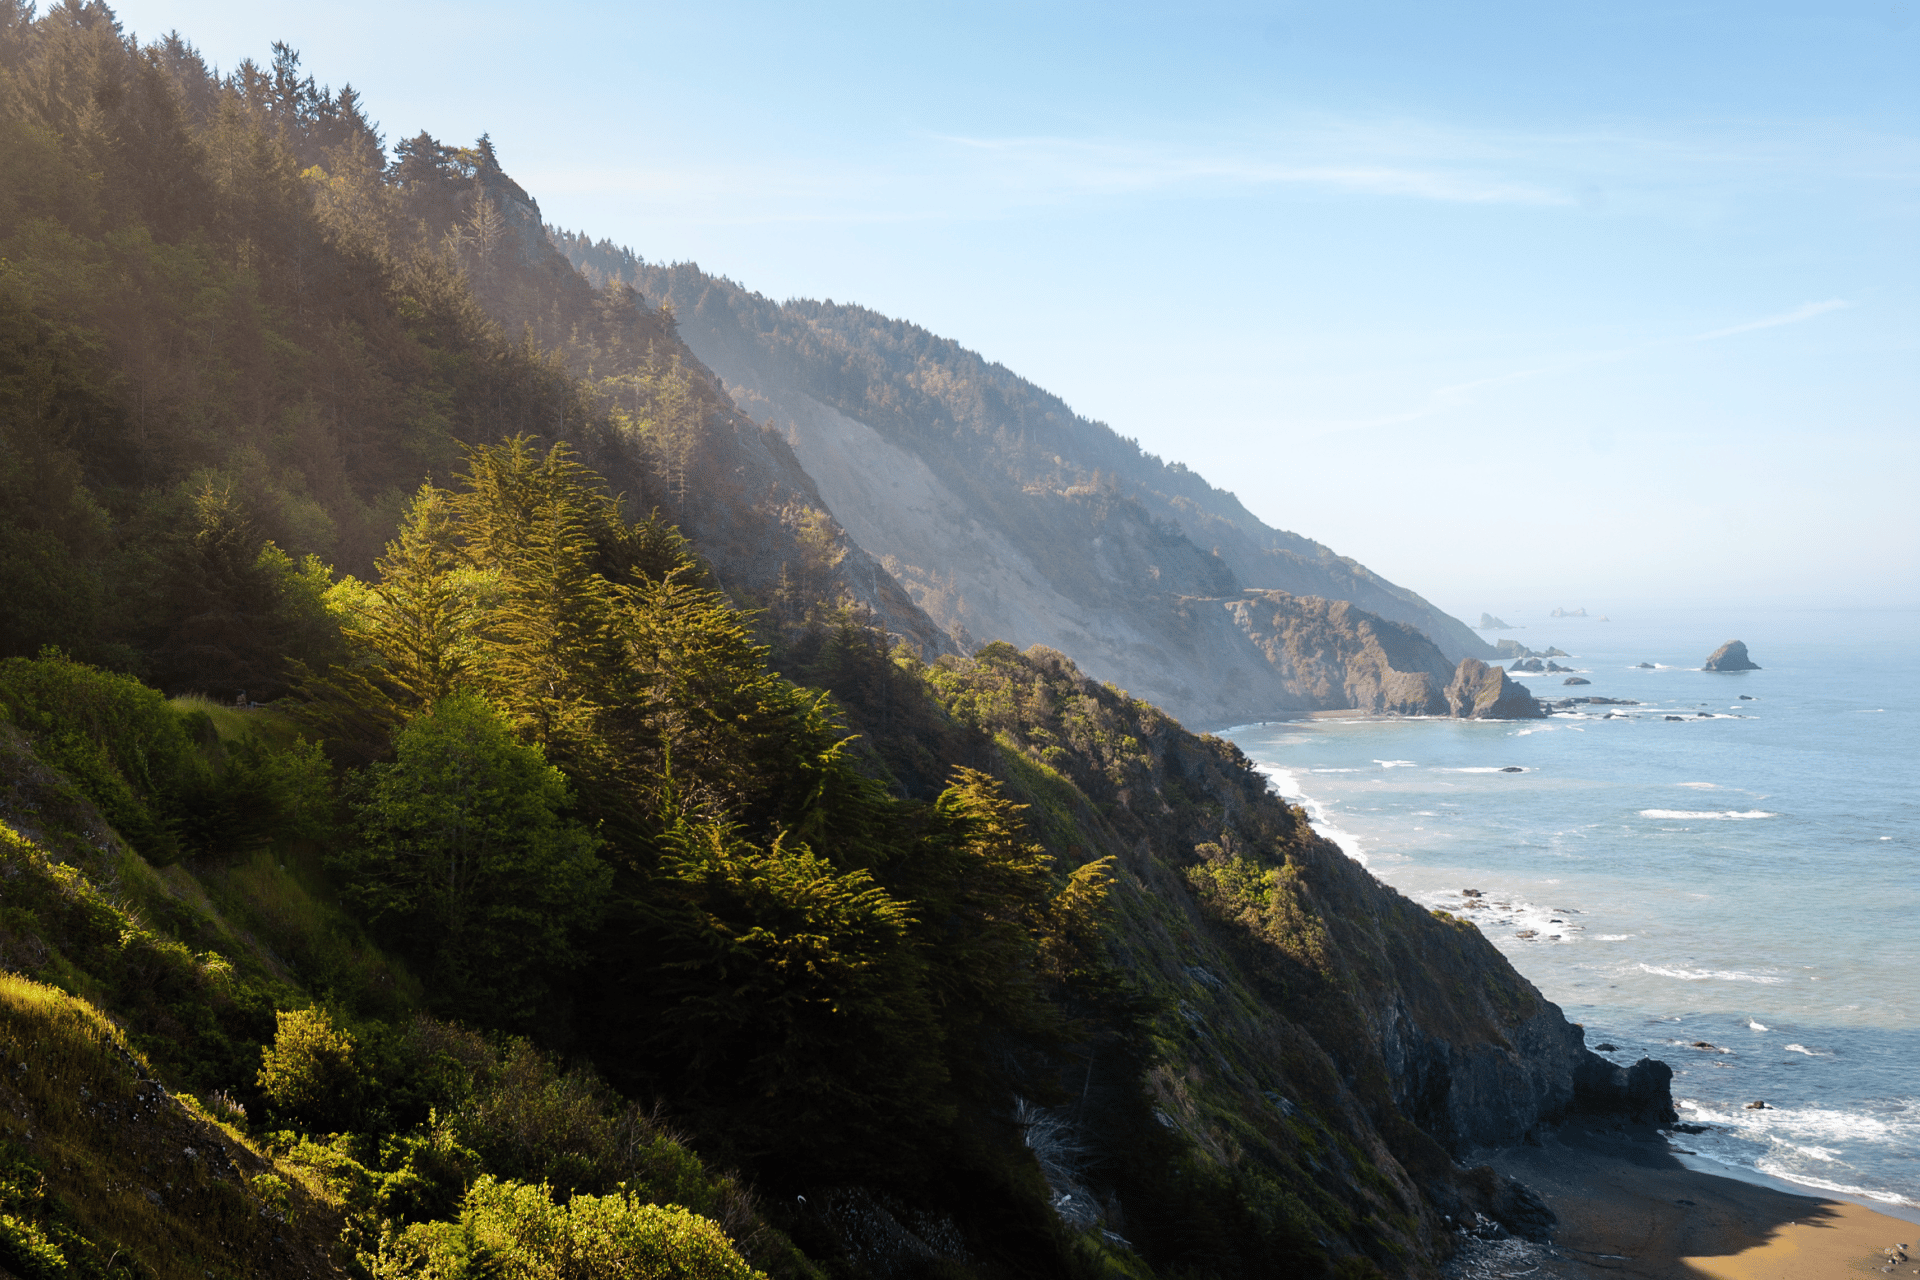 A view of the coast of Northern California